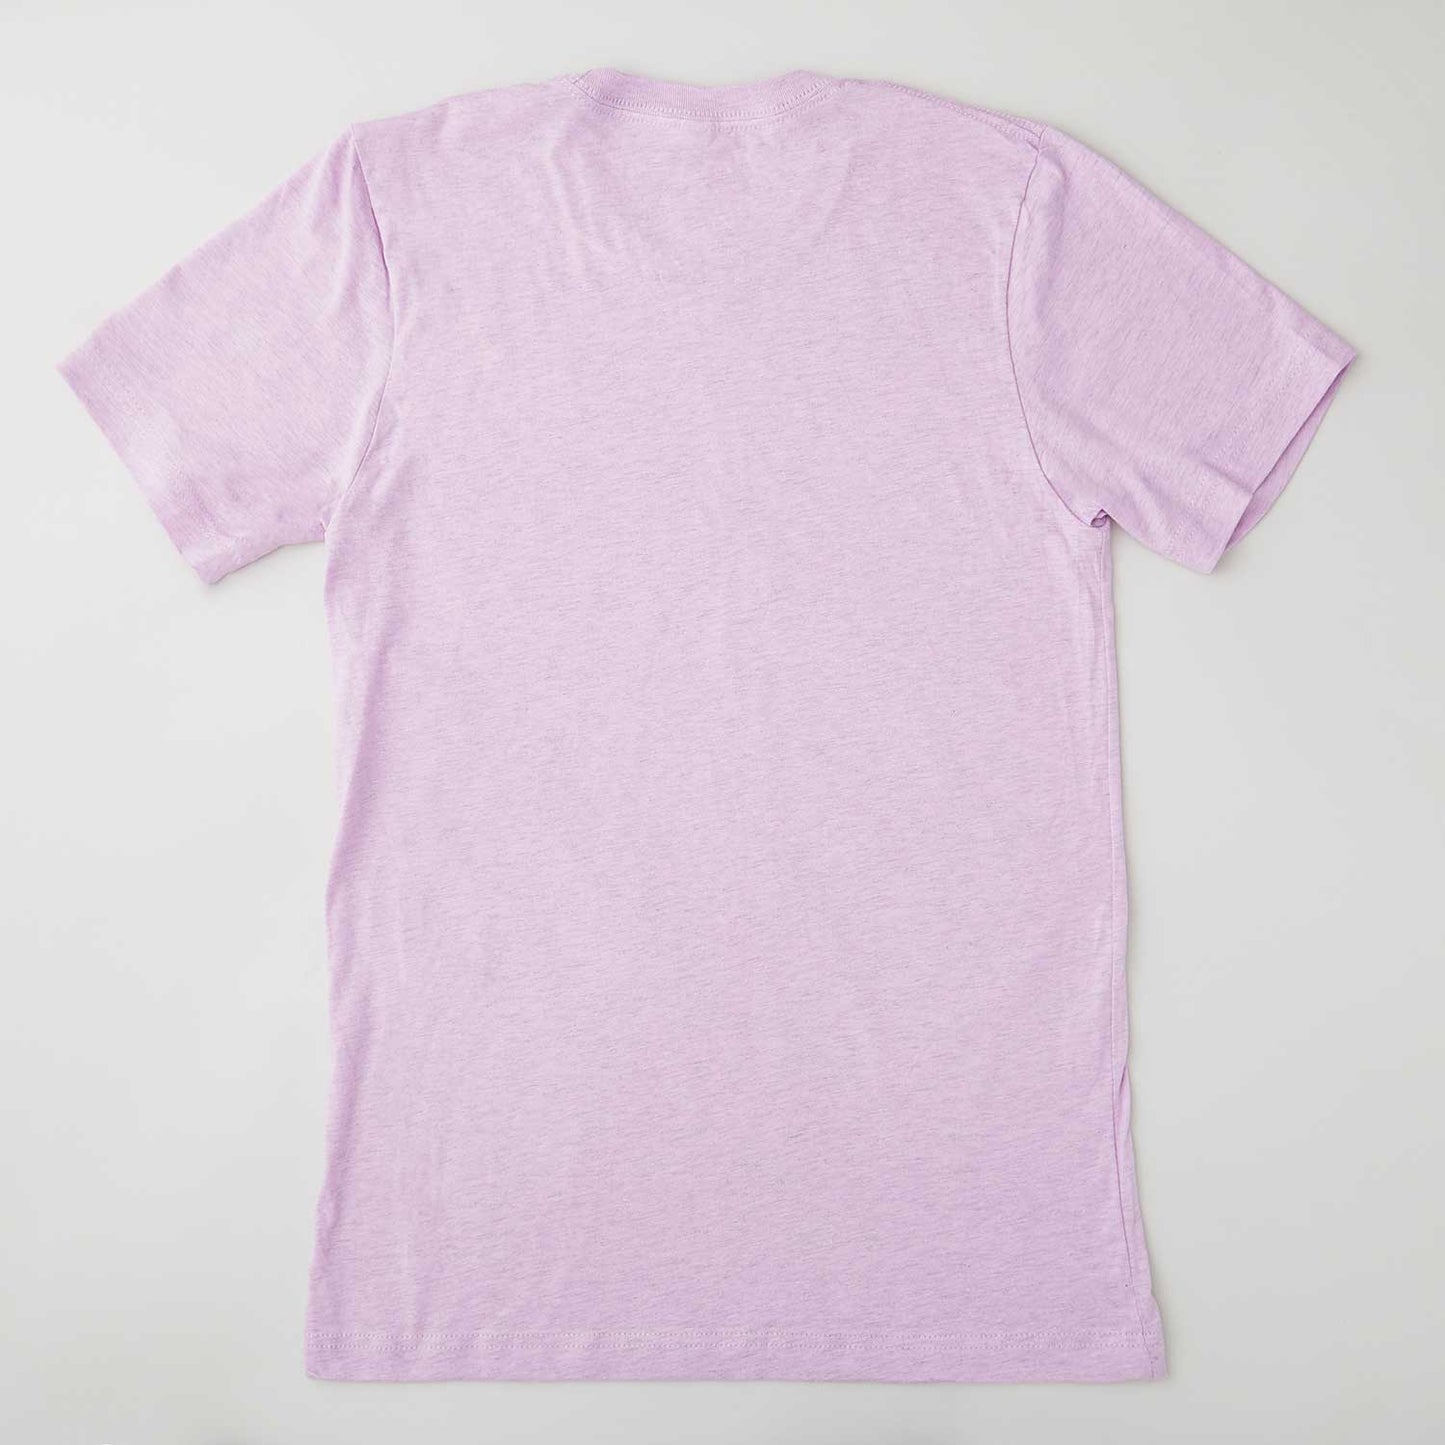 Quiltmaker T-shirt - Heather Prism Lilac - S Alternative View #1